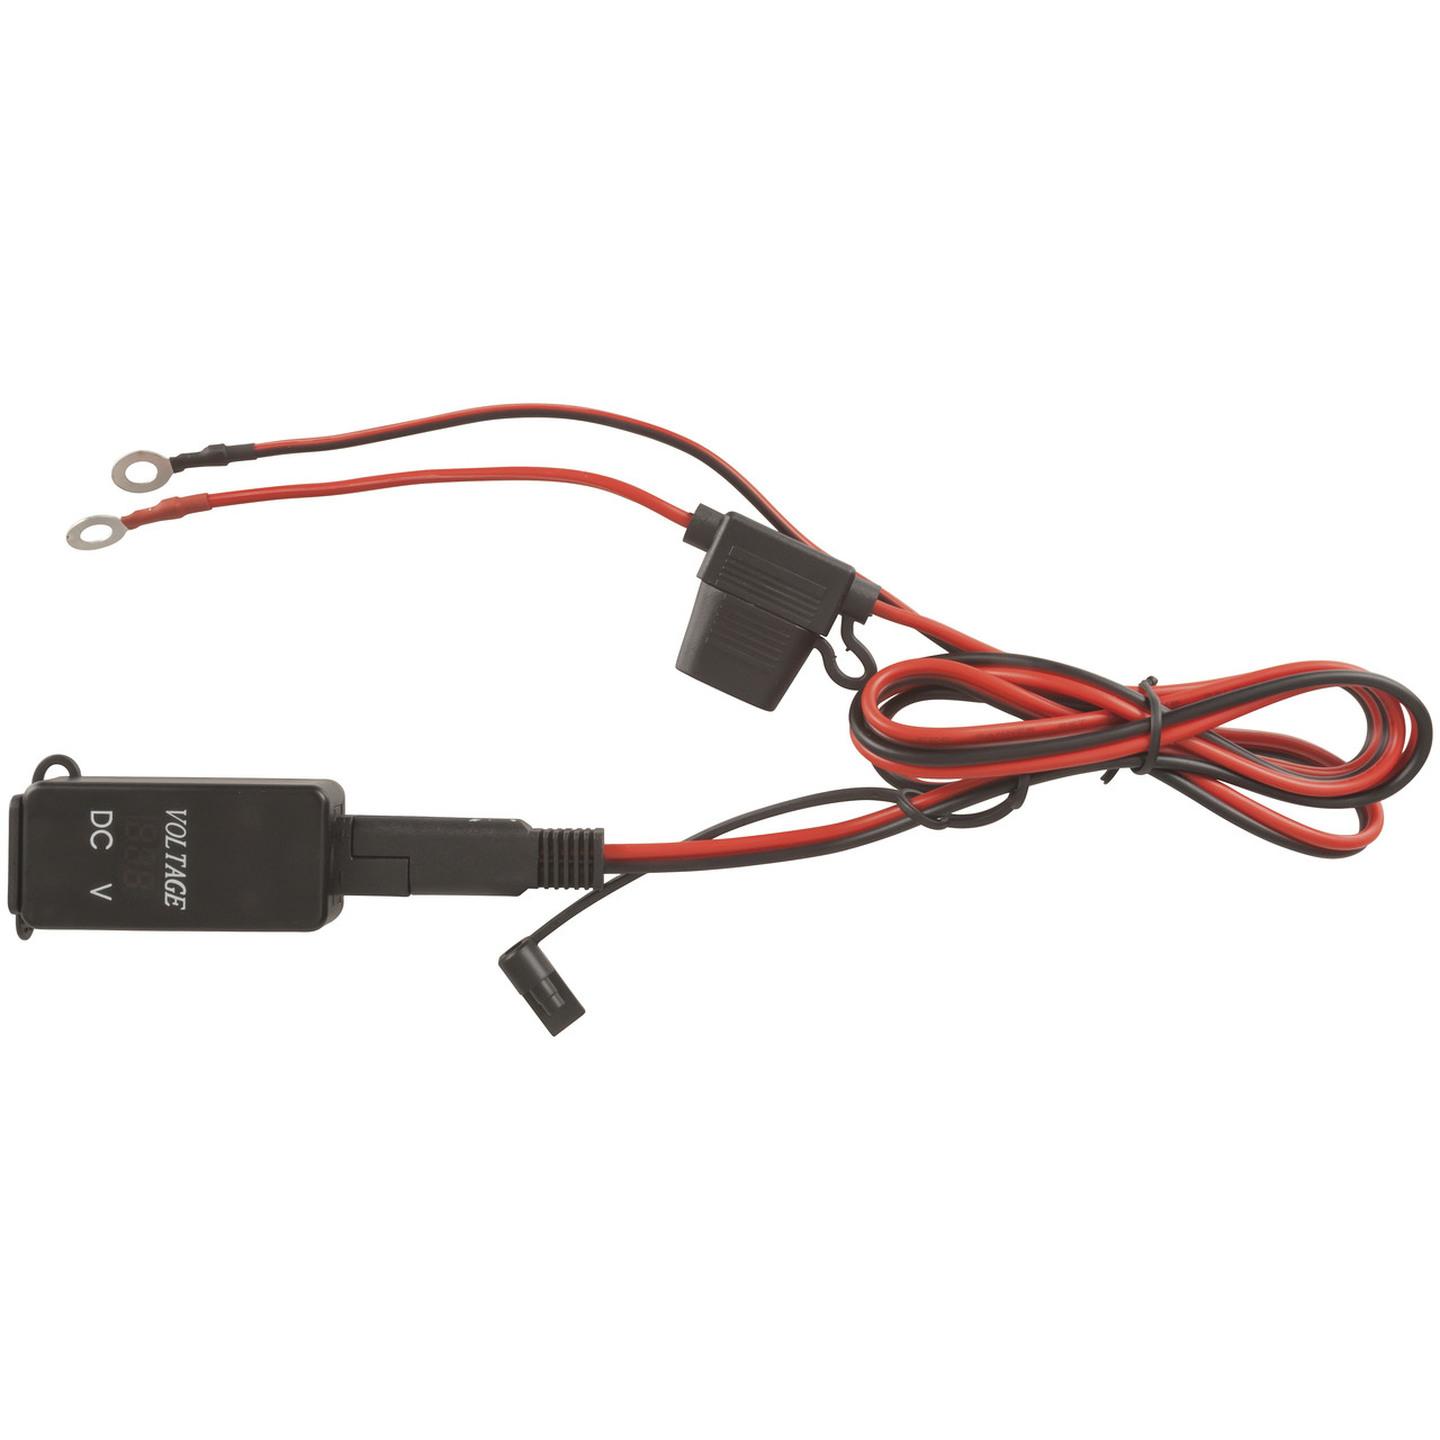 12/24VDC Dual USB Charger with Voltage Display